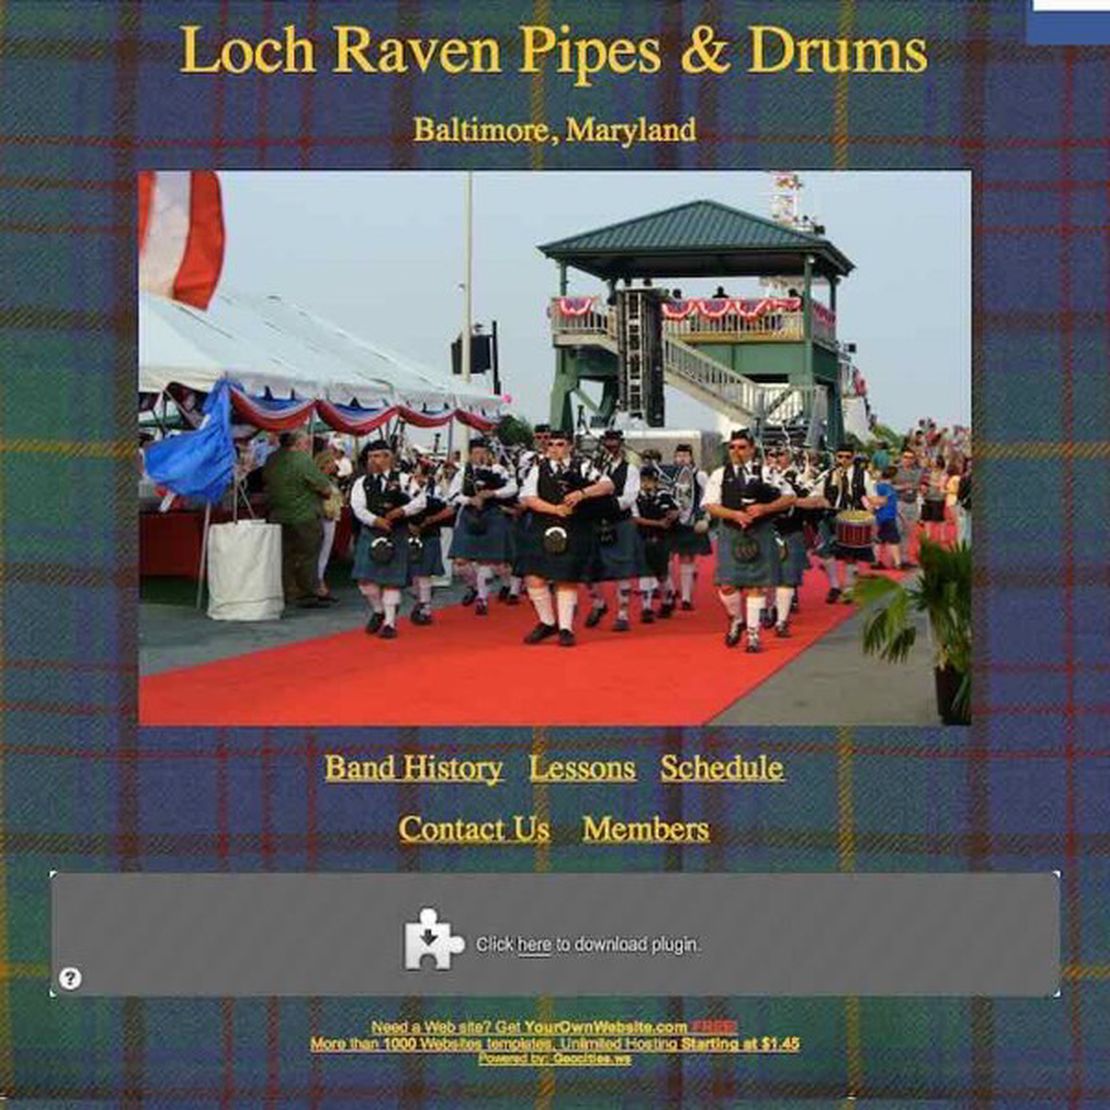 loch raven pipes & drums